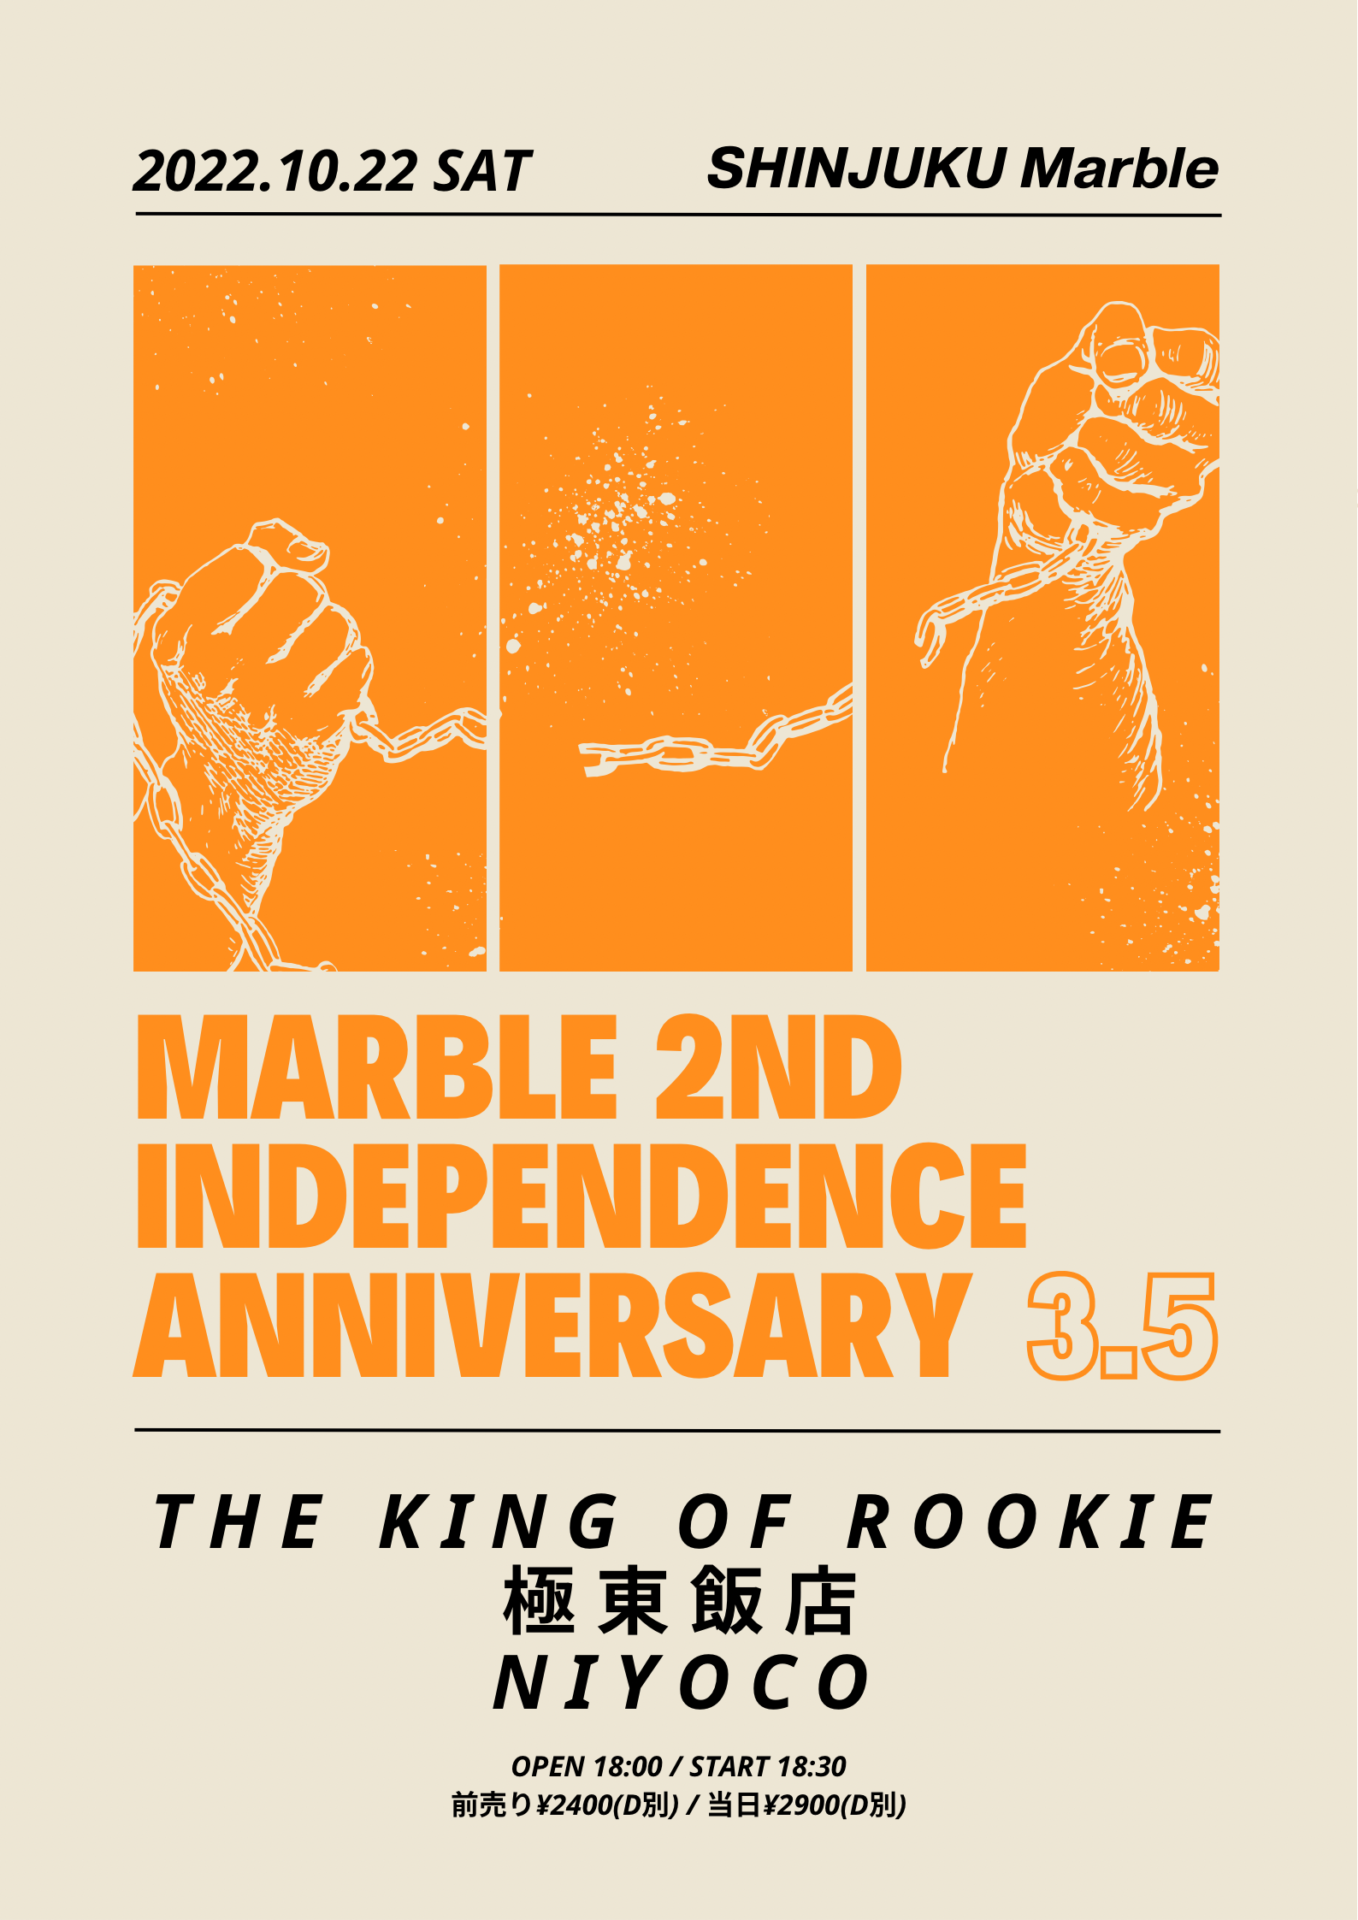 Marble 2nd INDEPENDENCE ANNIVERSARY 3.5